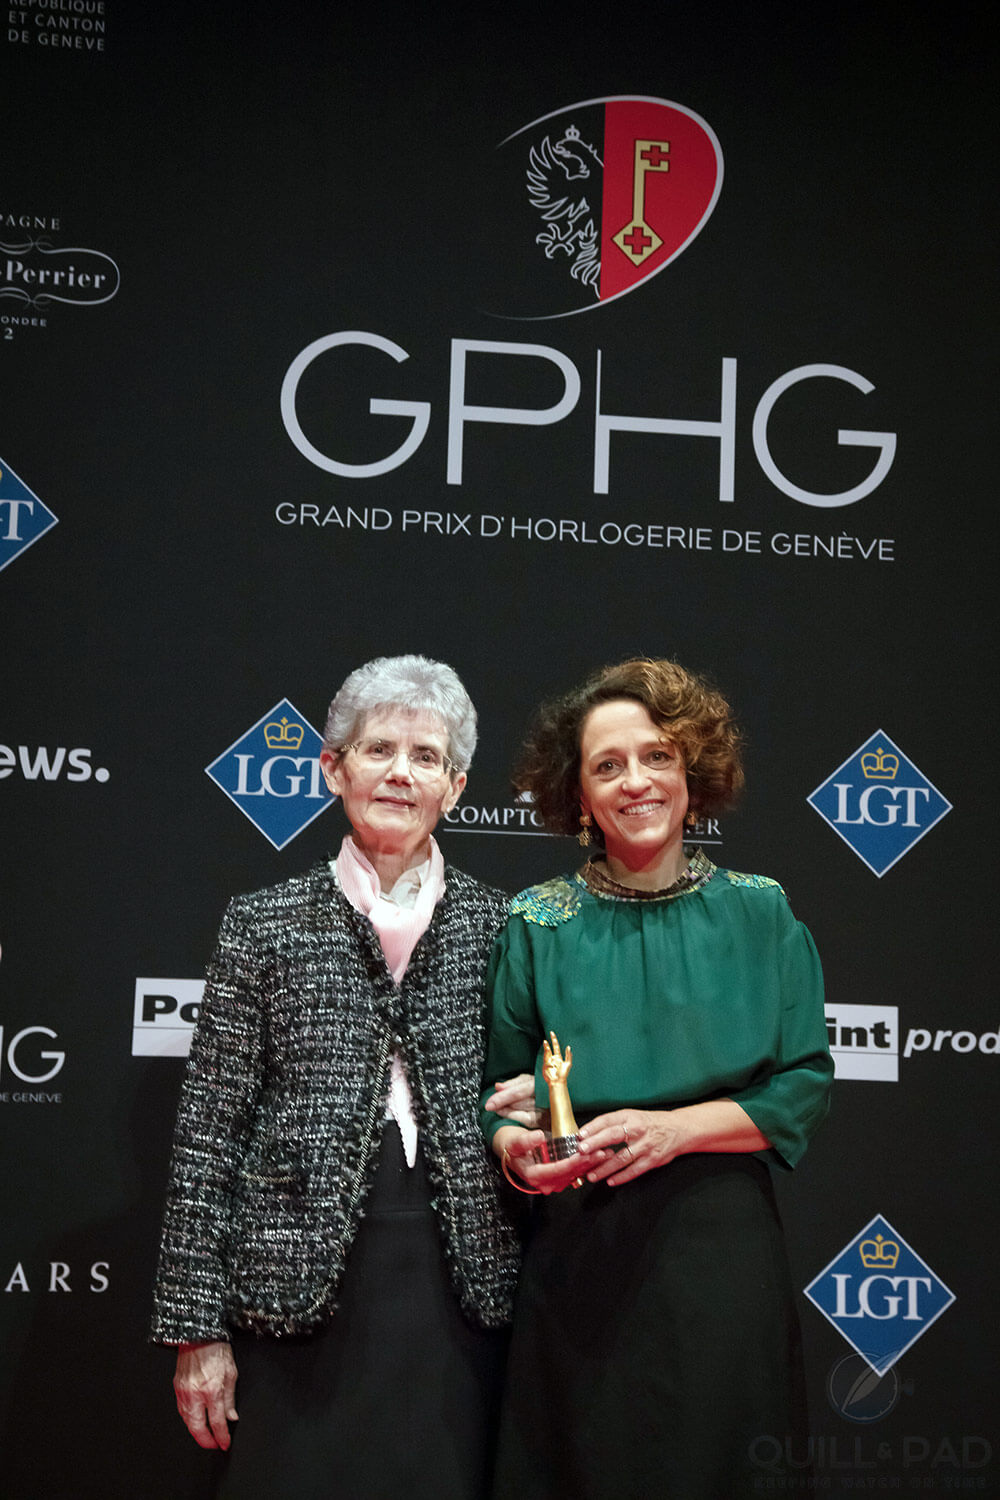 GPHG Special Jury Prize 2017 award ed to Suzanne Rohr and Anita Porchet (photo courtesy Gregory Maillot/www.point-of-views.ch)